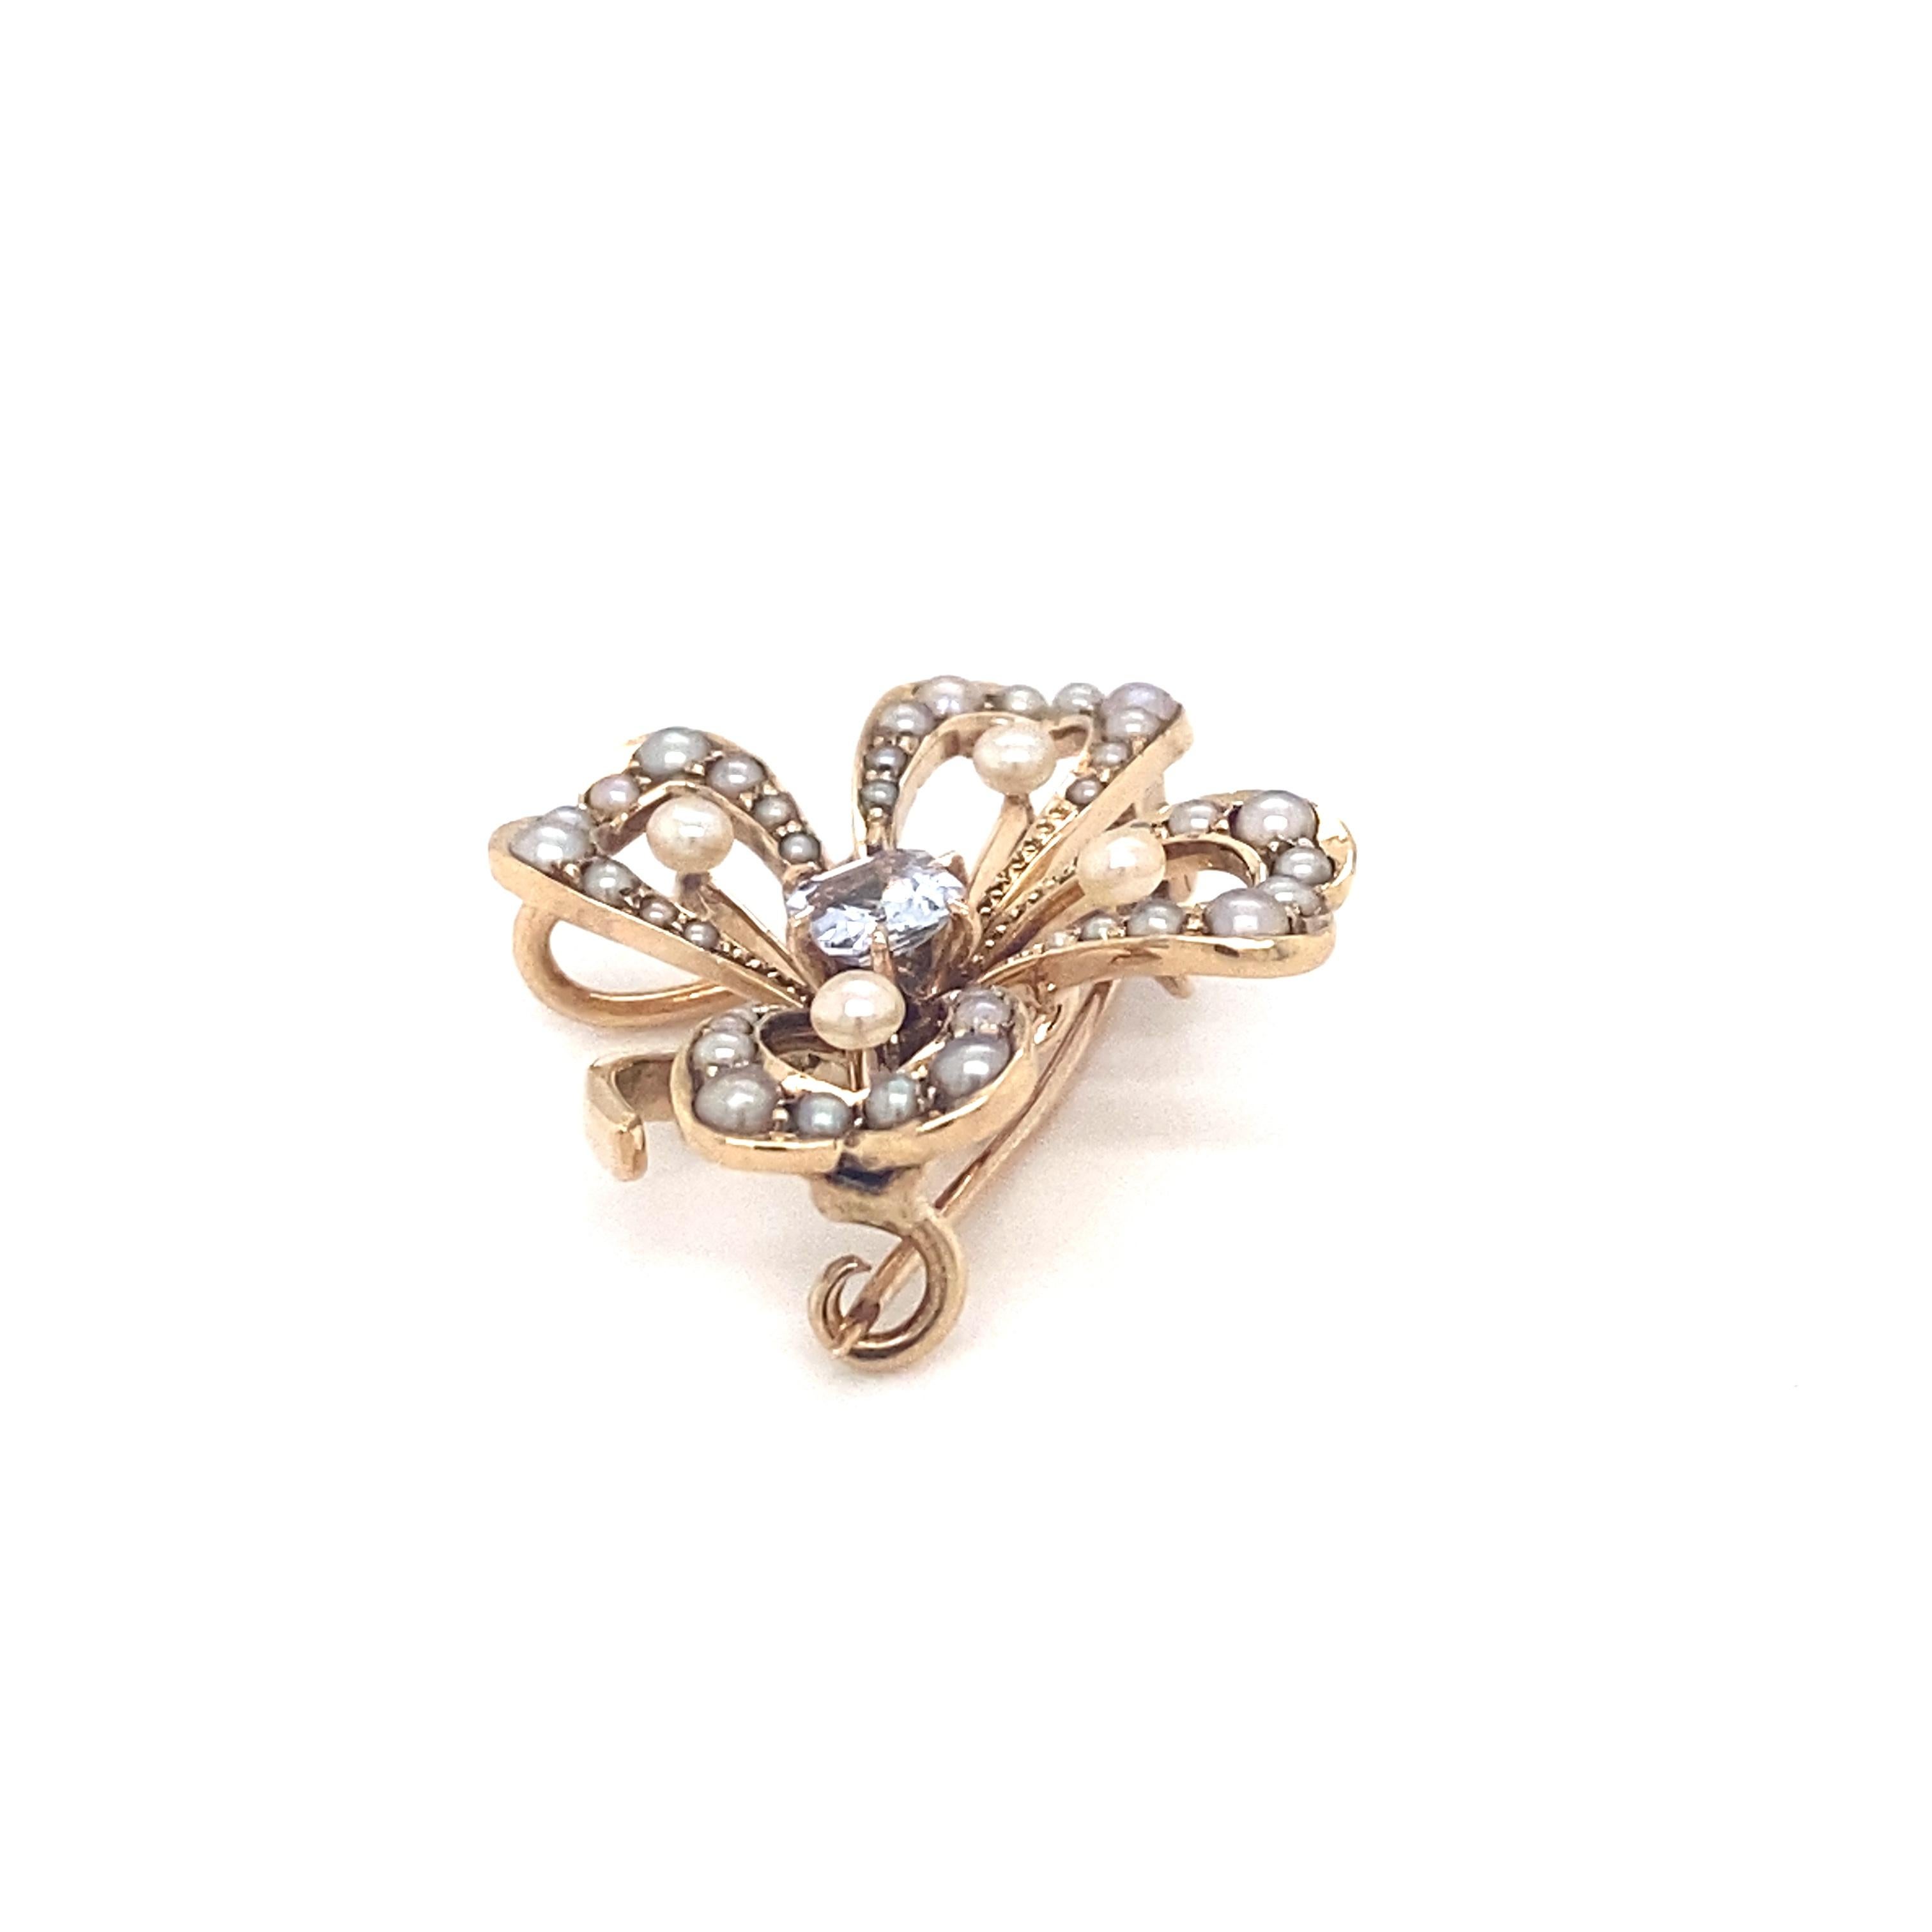 Circa 1890s Victorian Pearl and Ceylon Sapphire Clover Brooch in 14 Karat Gold For Sale 1